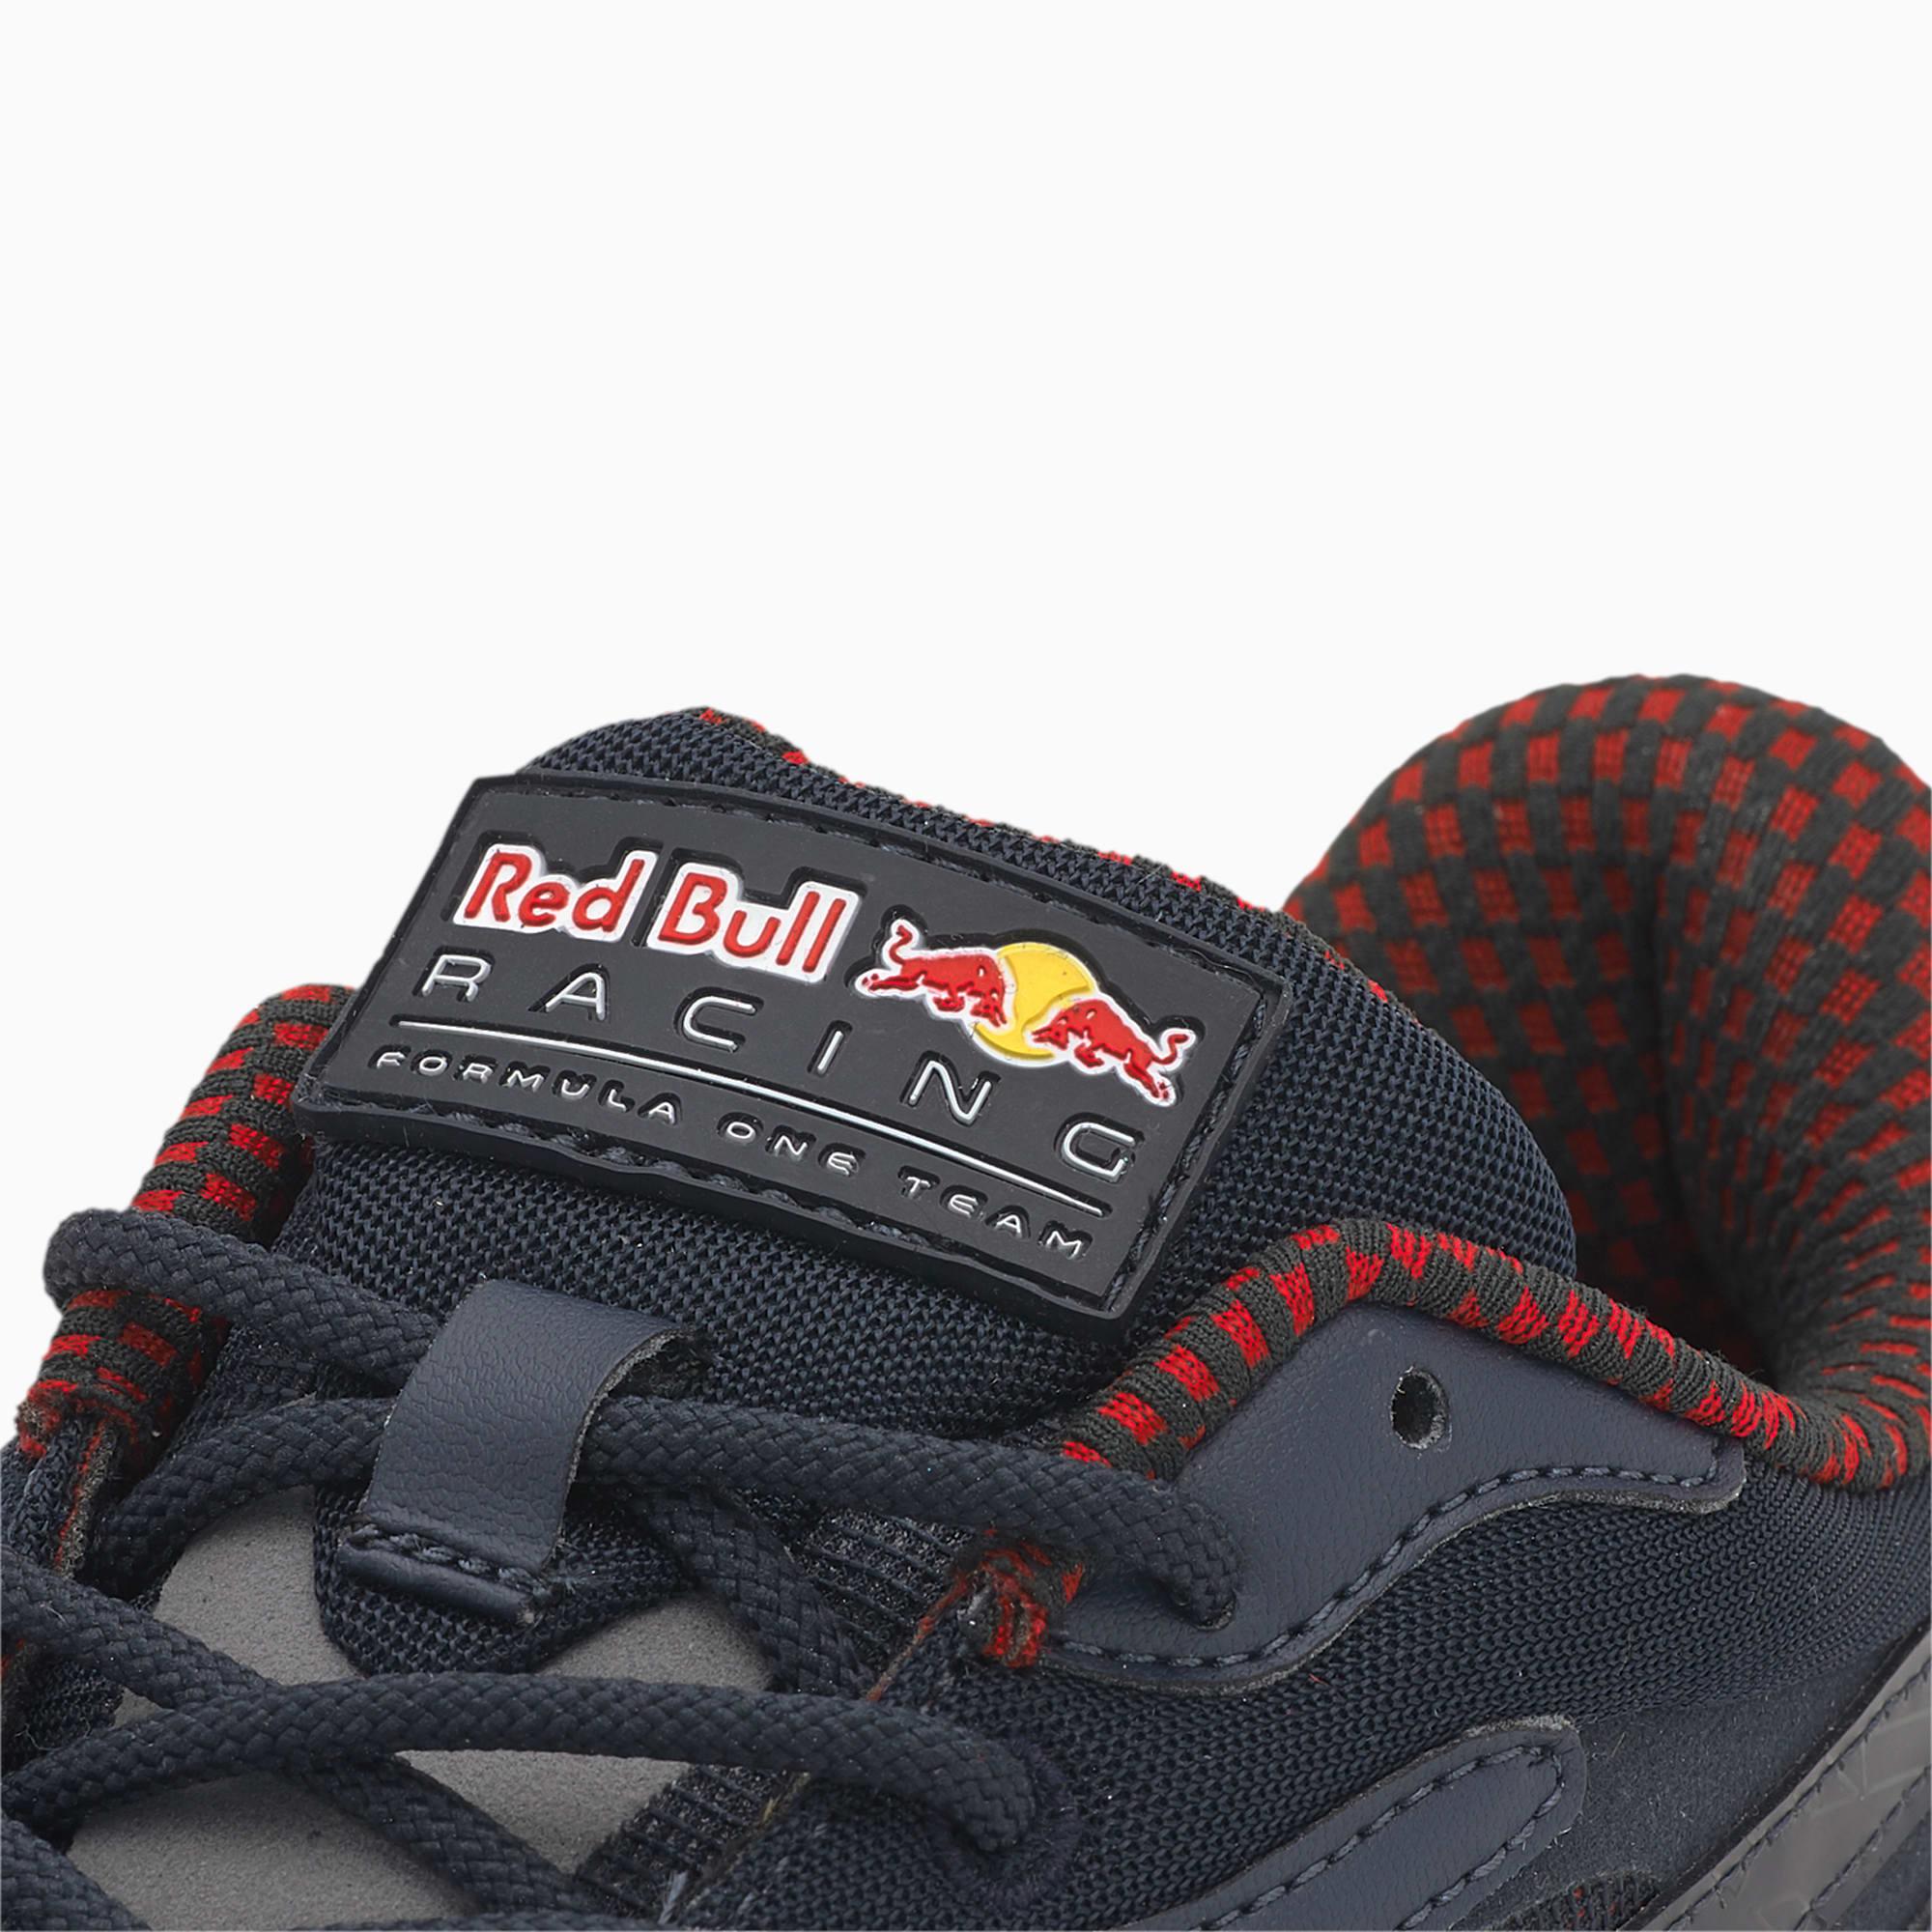 PUMA Suede Red Bull Racing Rs-x3 Sneakers for Men - Lyst